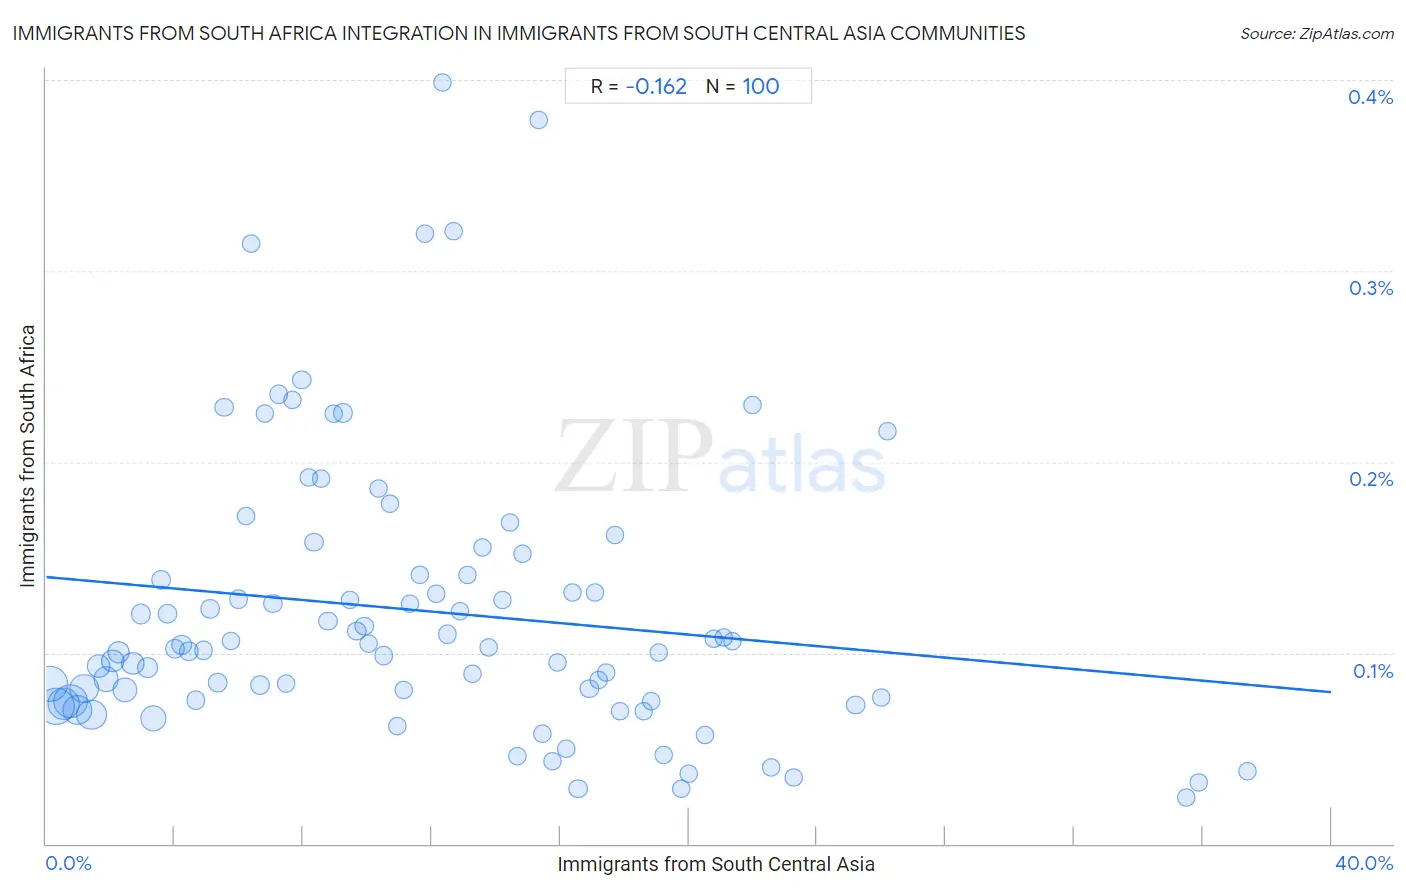 Immigrants from South Central Asia Integration in Immigrants from South Africa Communities